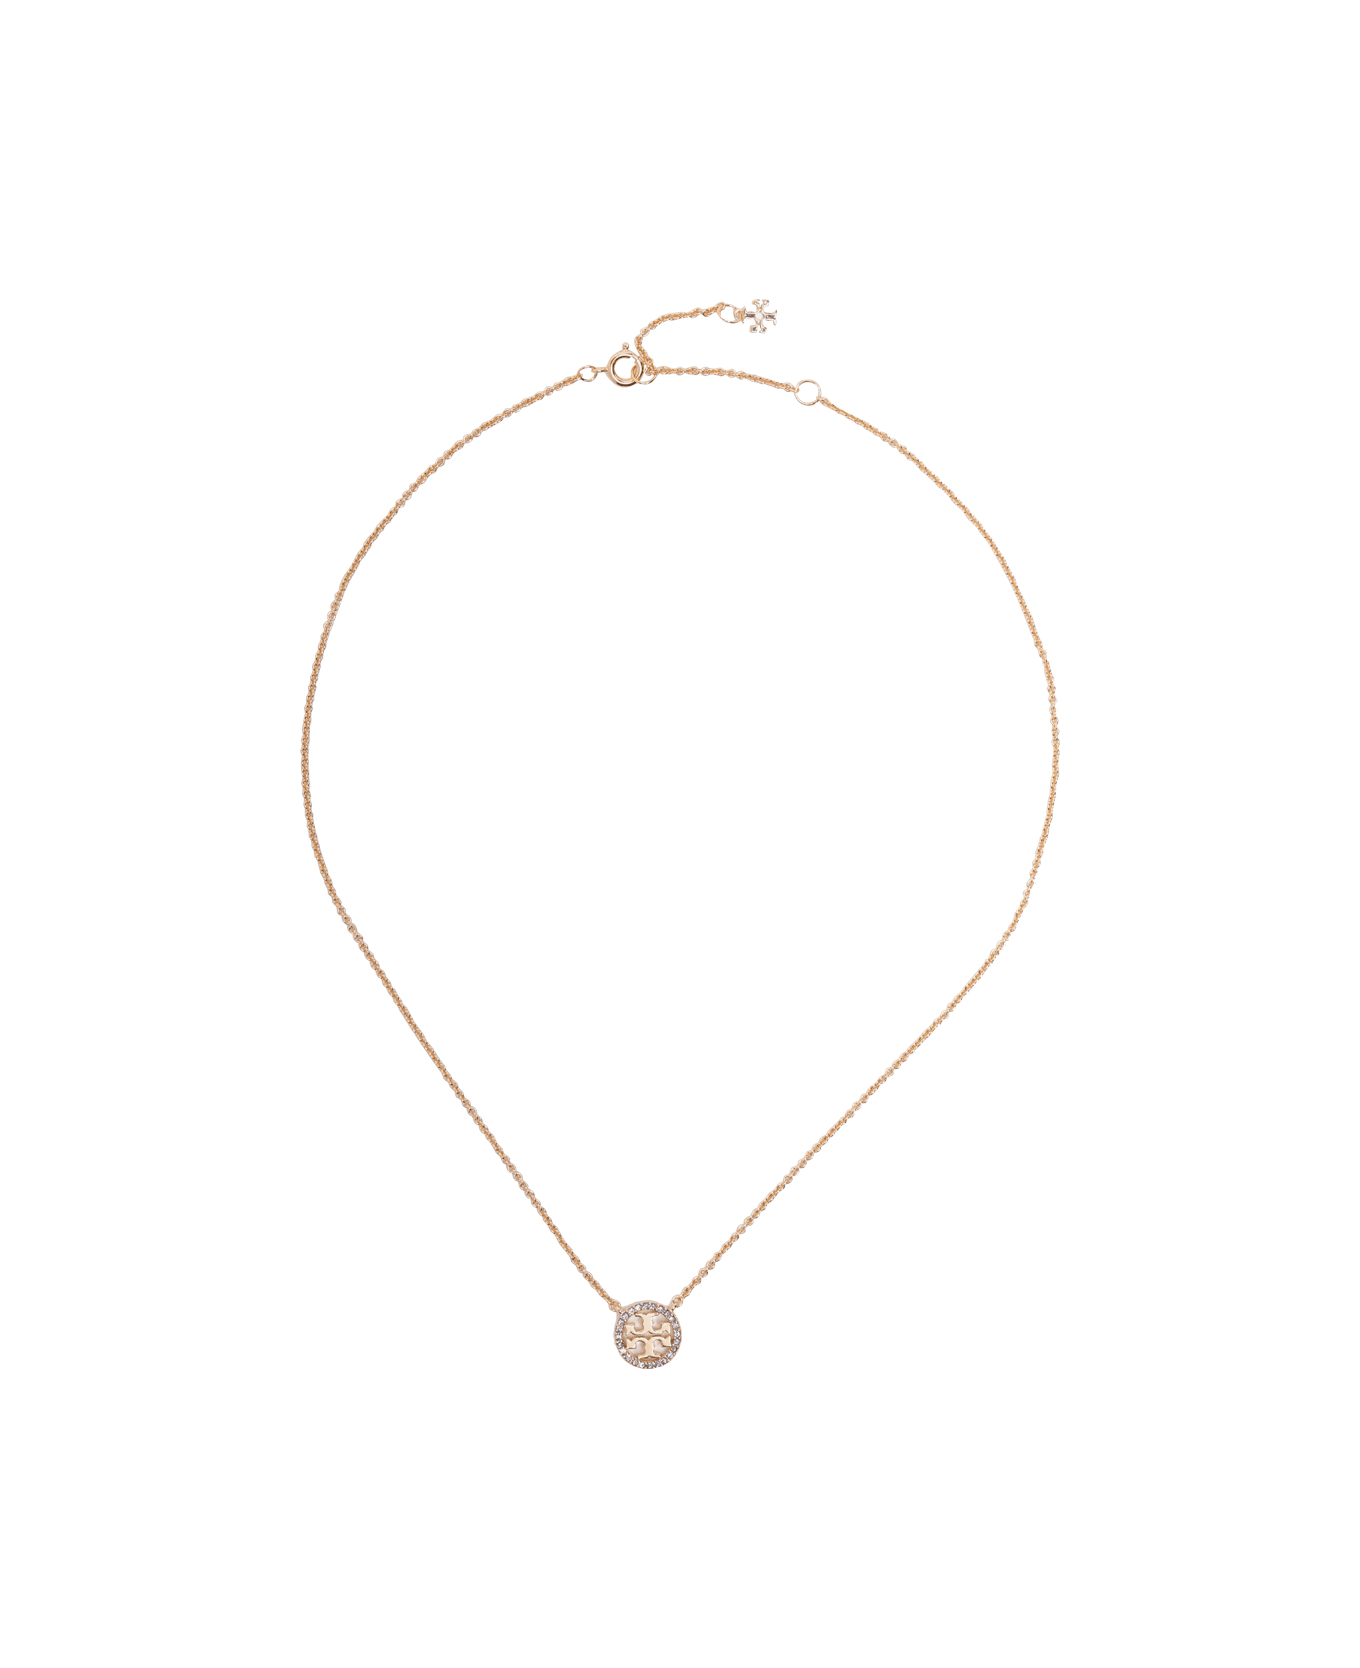 Tory Burch Miller Pave Pendant Necklace - Golden ネックレス